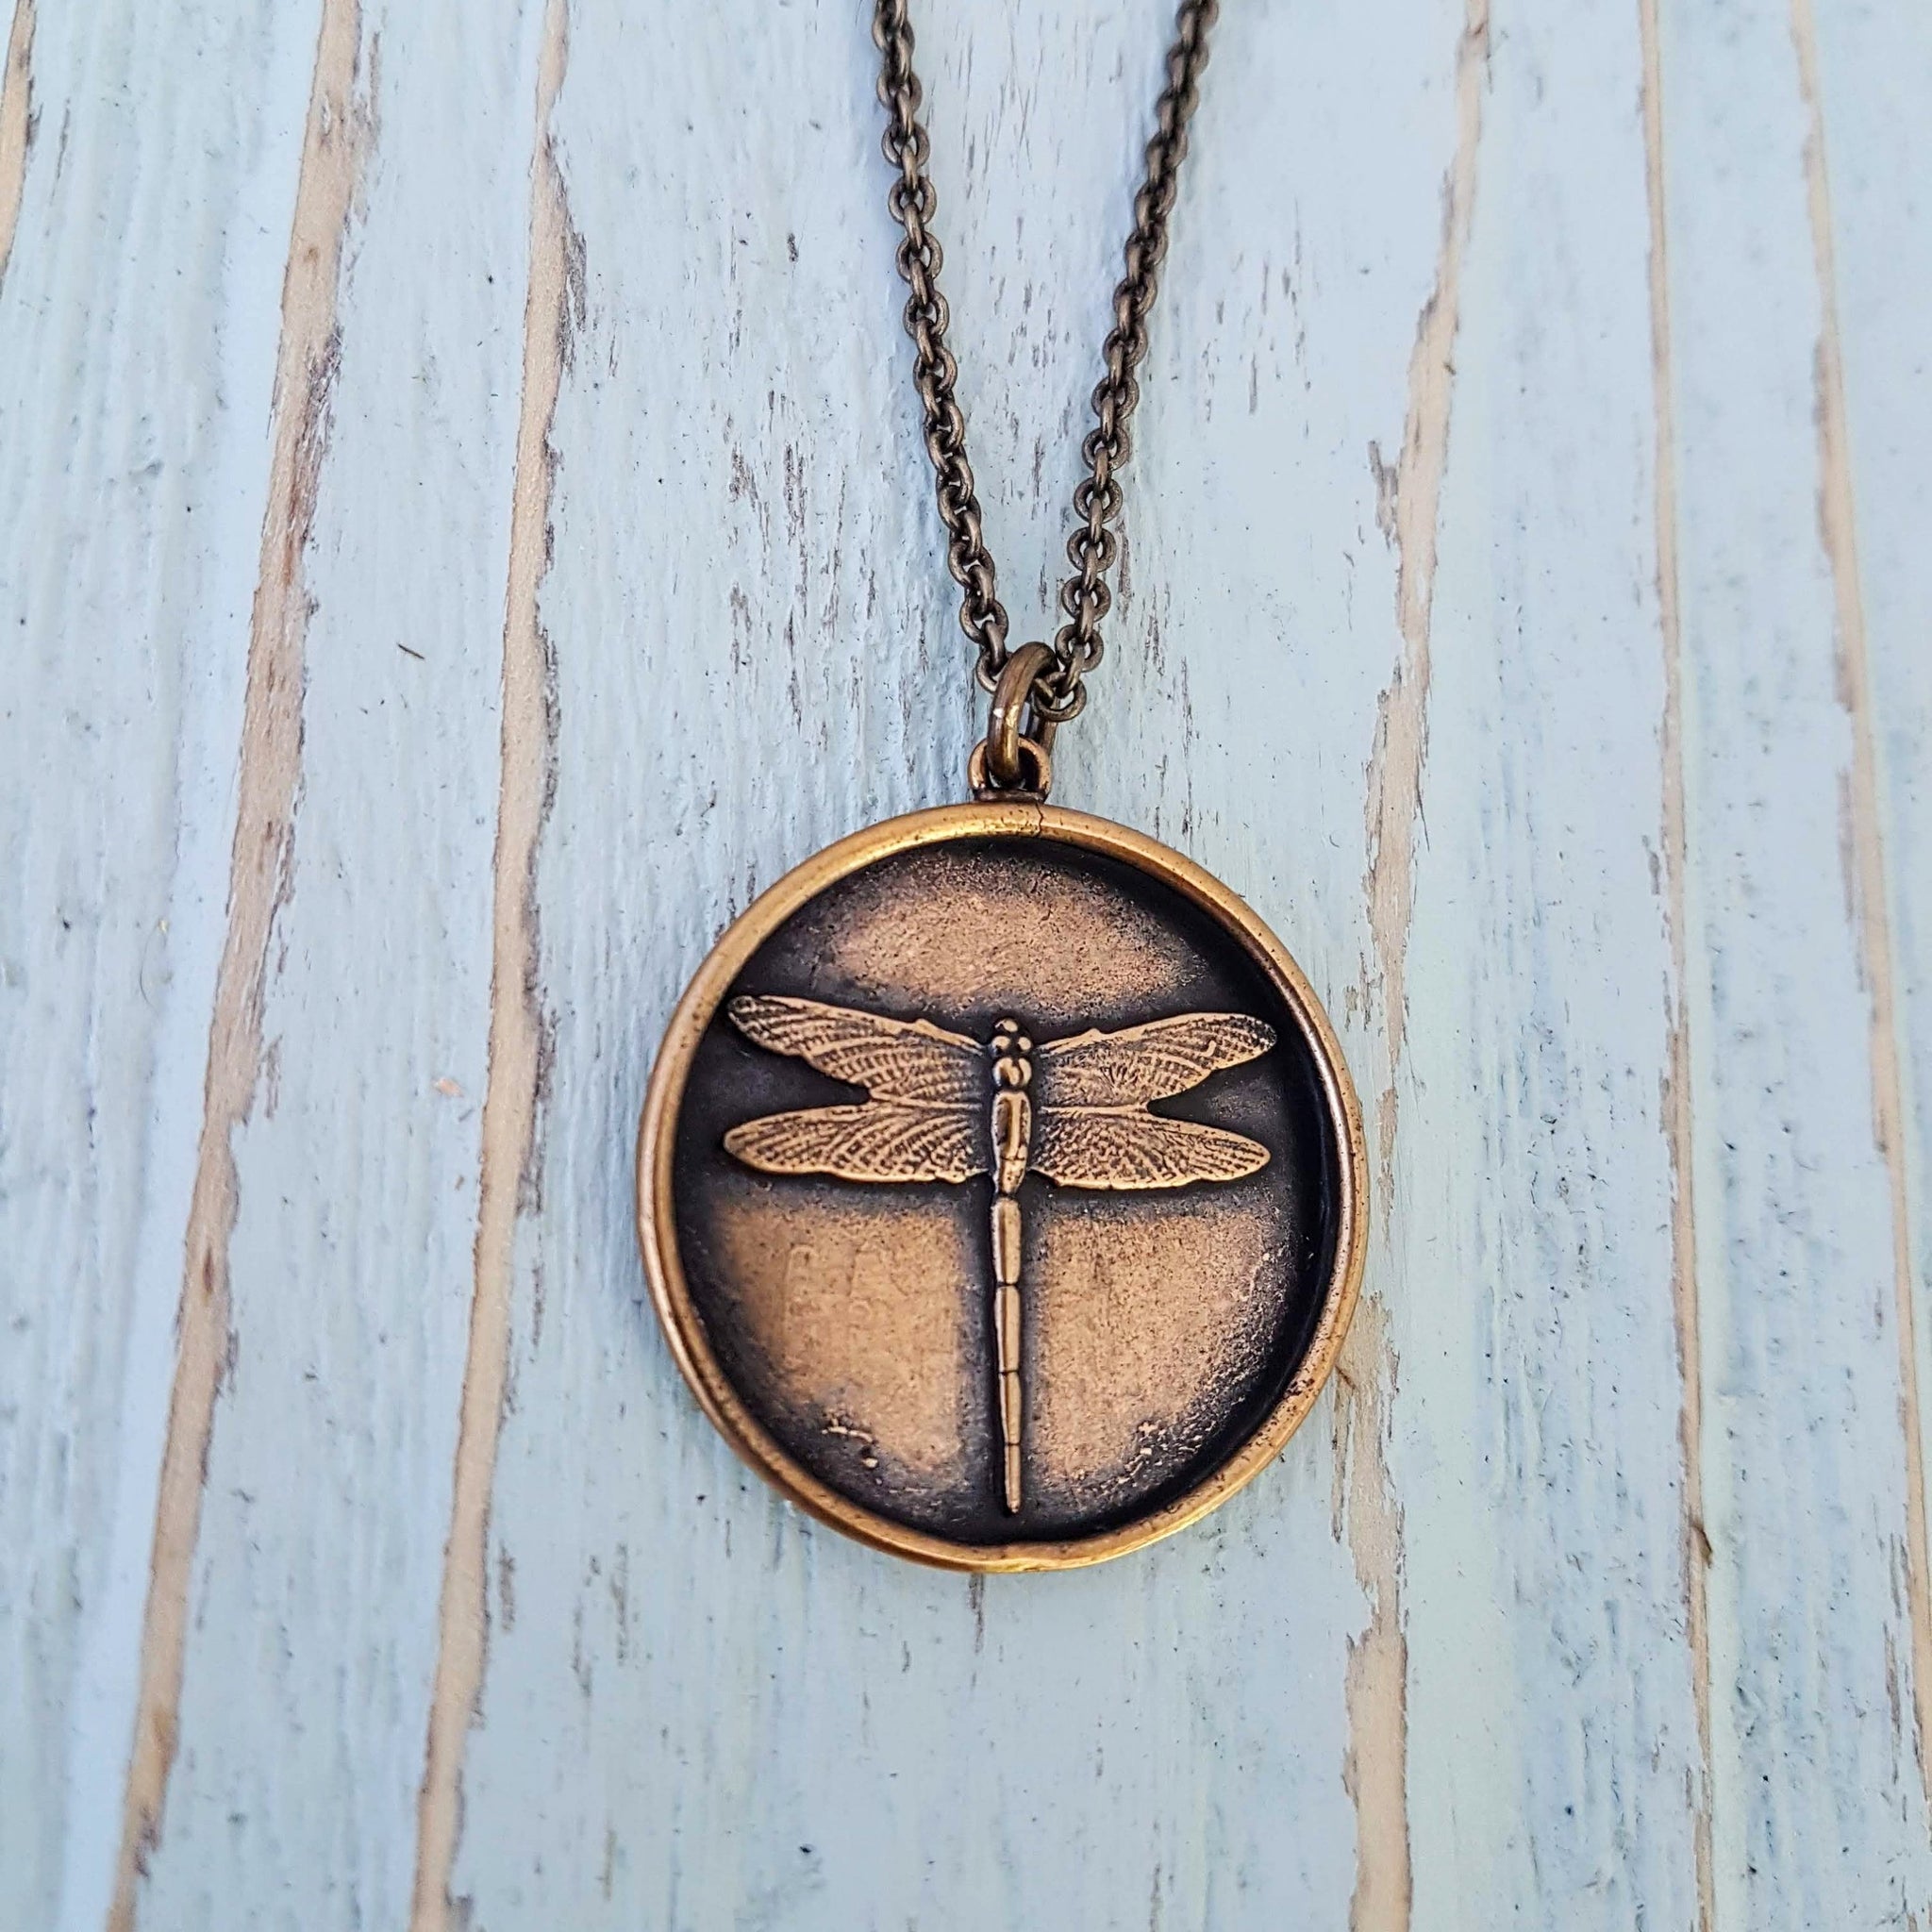 Personalized Gold Necklace, Dragonfly Jewelry, Insect Necklace, Engraved Gift for Mom, Simple Disc Pendant, Round Disc Jewelry Custom Length - Gwen Delicious Jewelry Designs